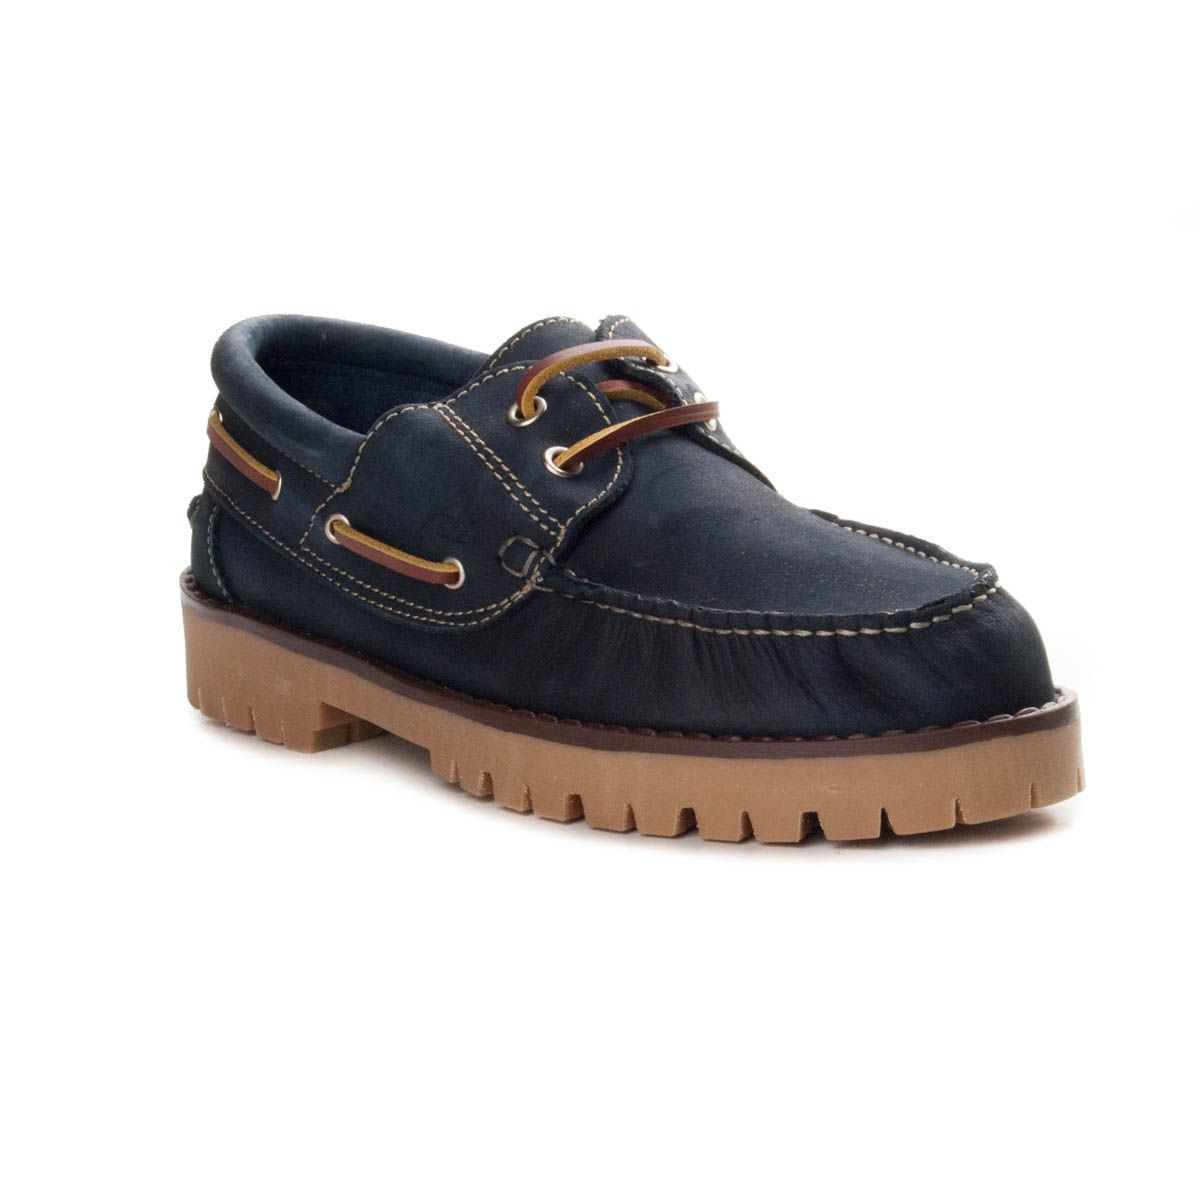 Nautical woman's shoe, made in leather, special because of her softness and comfort. Light rubber sole. Anti-slip floor. Fastened with cords. A shoe camper but at the same time stylish, ideal for day to day. So comfortable you always want to take it.